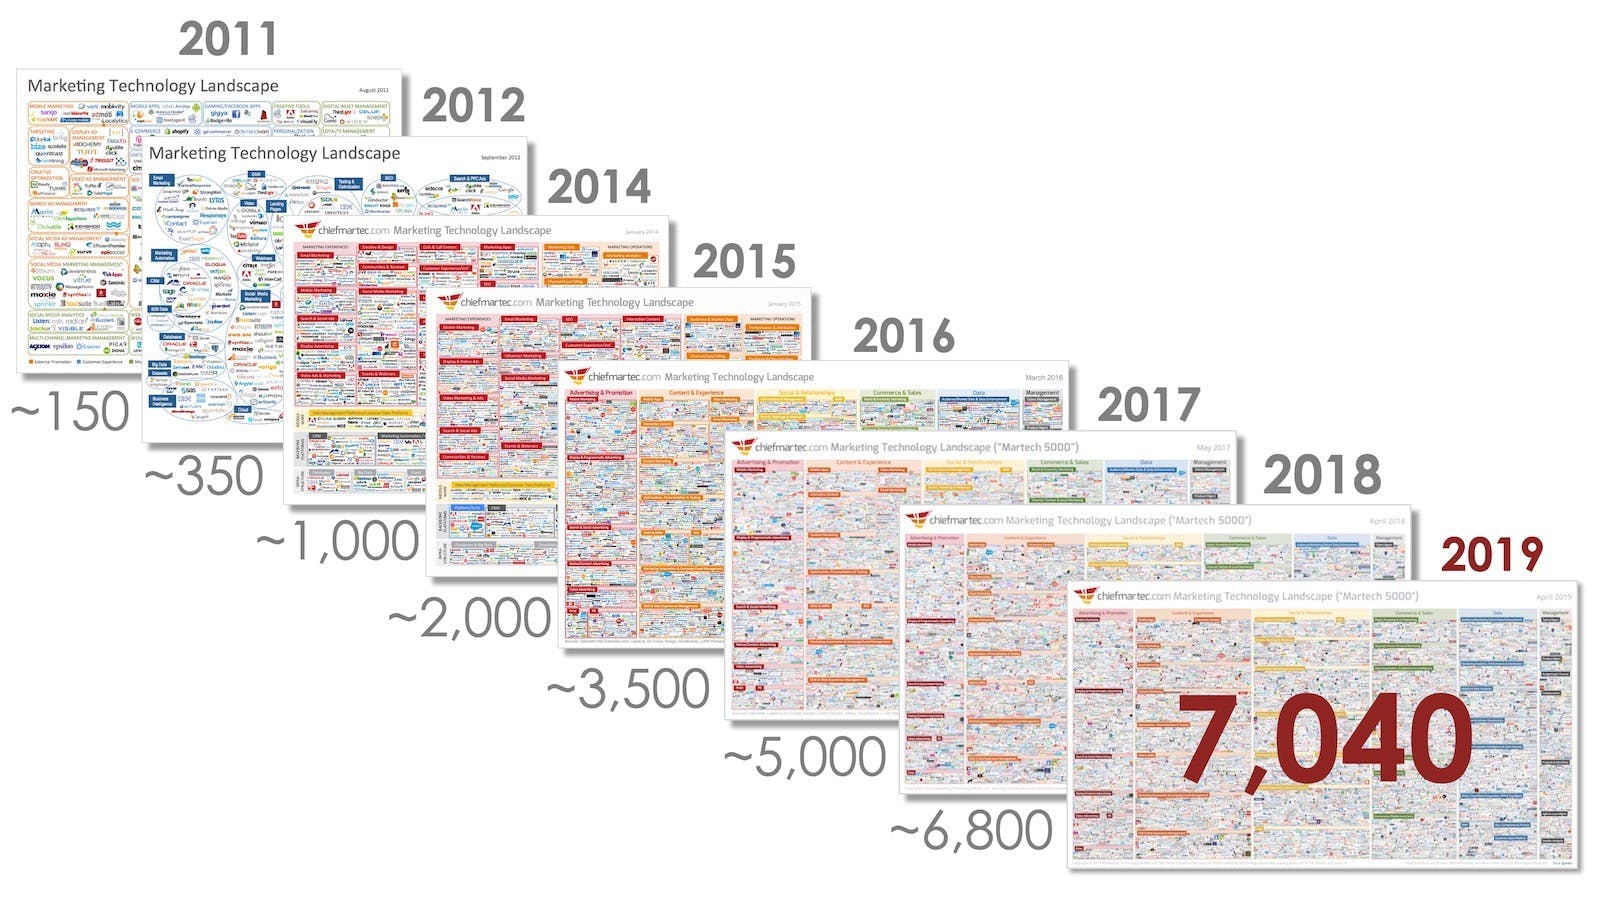 Diagram showing the proliferation of the martech category over the past 10 years